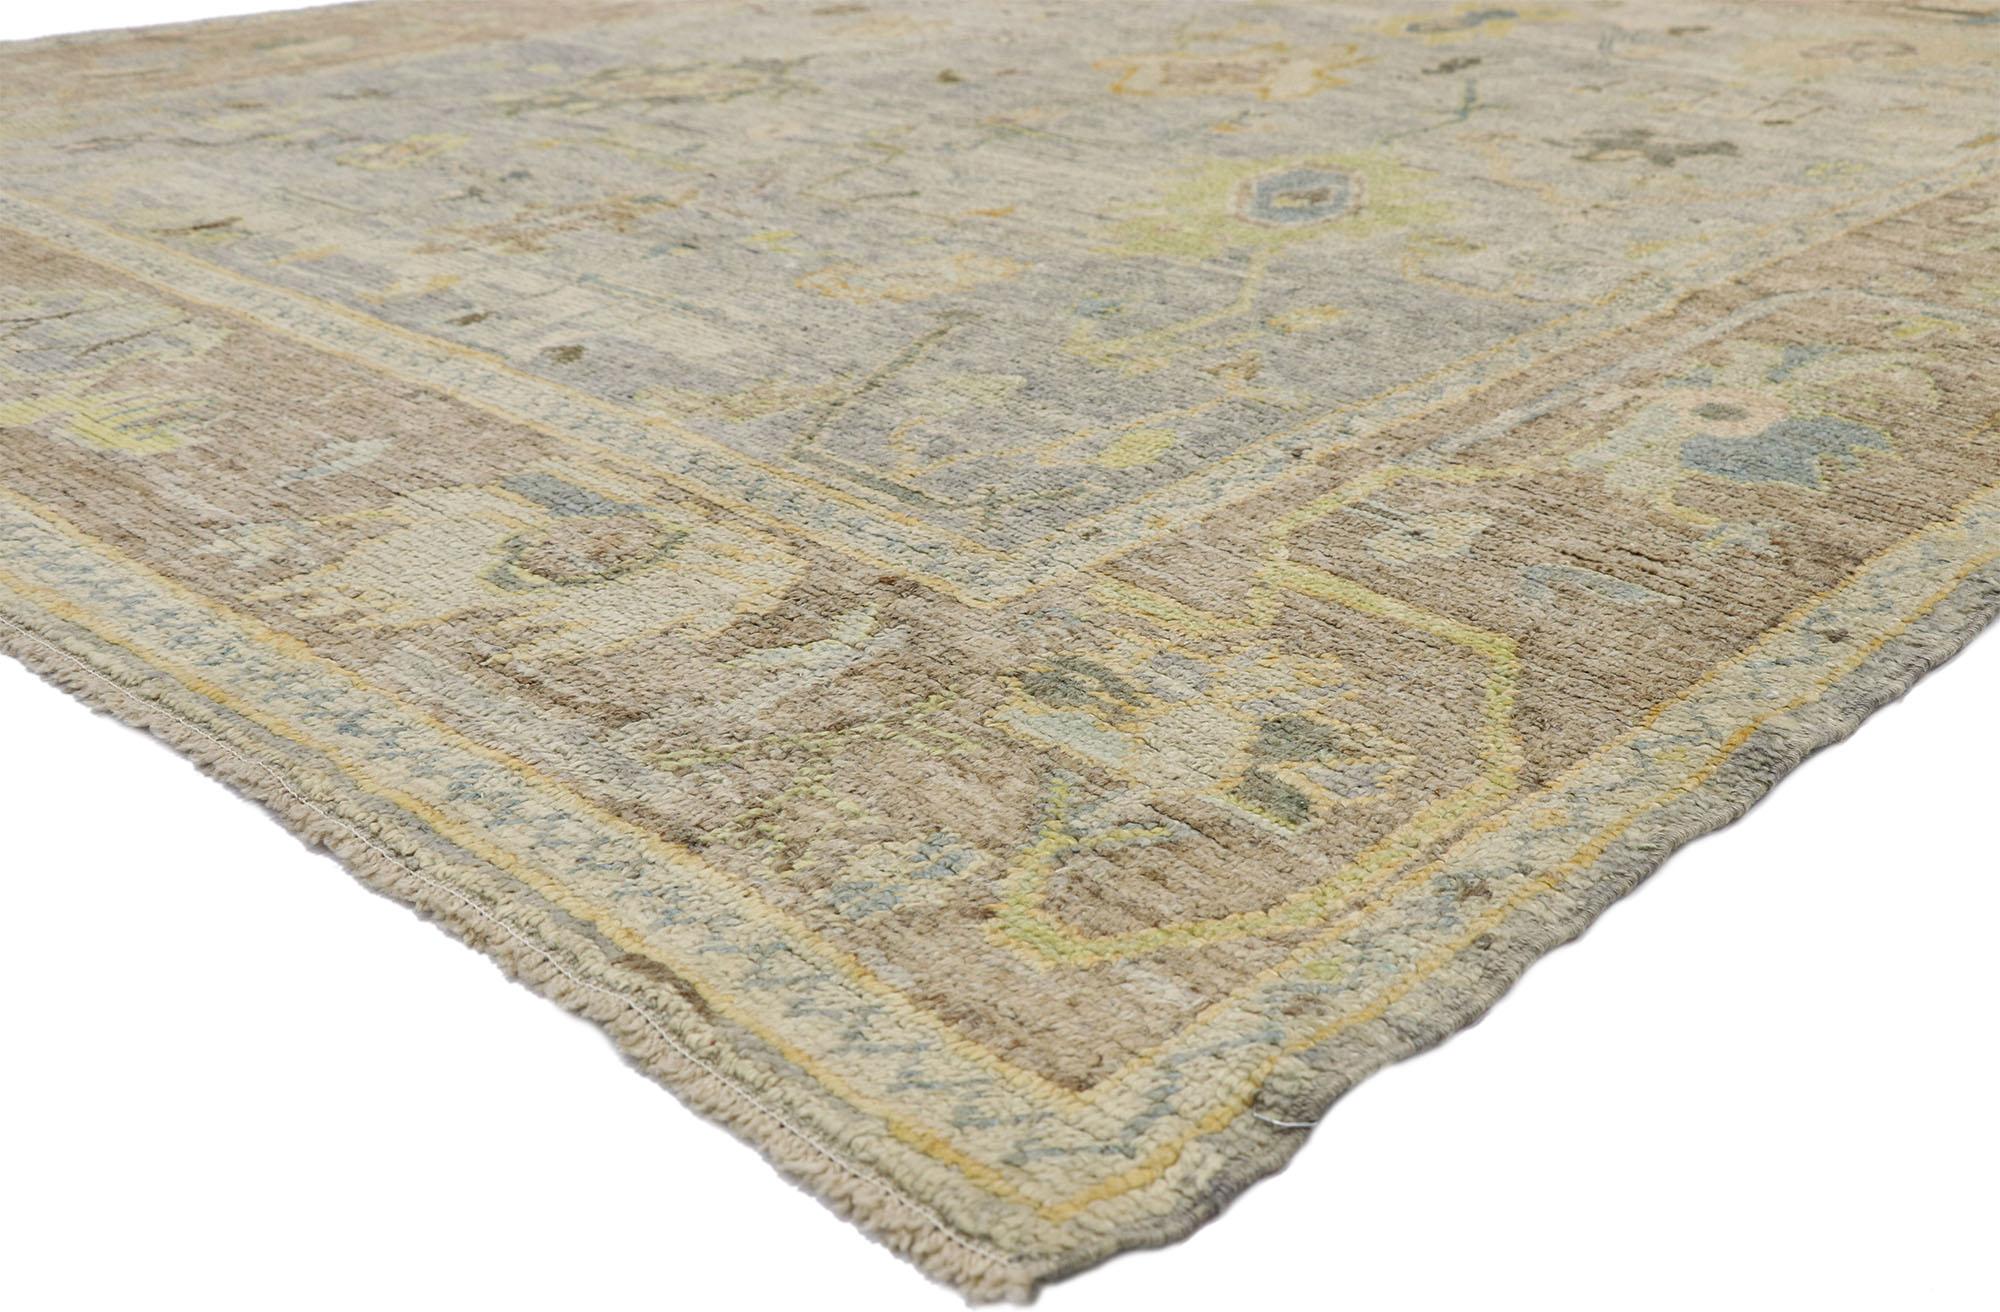 52542, contemporary Turkish Oushak rug with pastel colors and French Transitional style. Highly stylish yet tastefully casual, this new colorful Turkish Oushak rug features an all-over geometric pattern composed of Harshang motifs, blooming